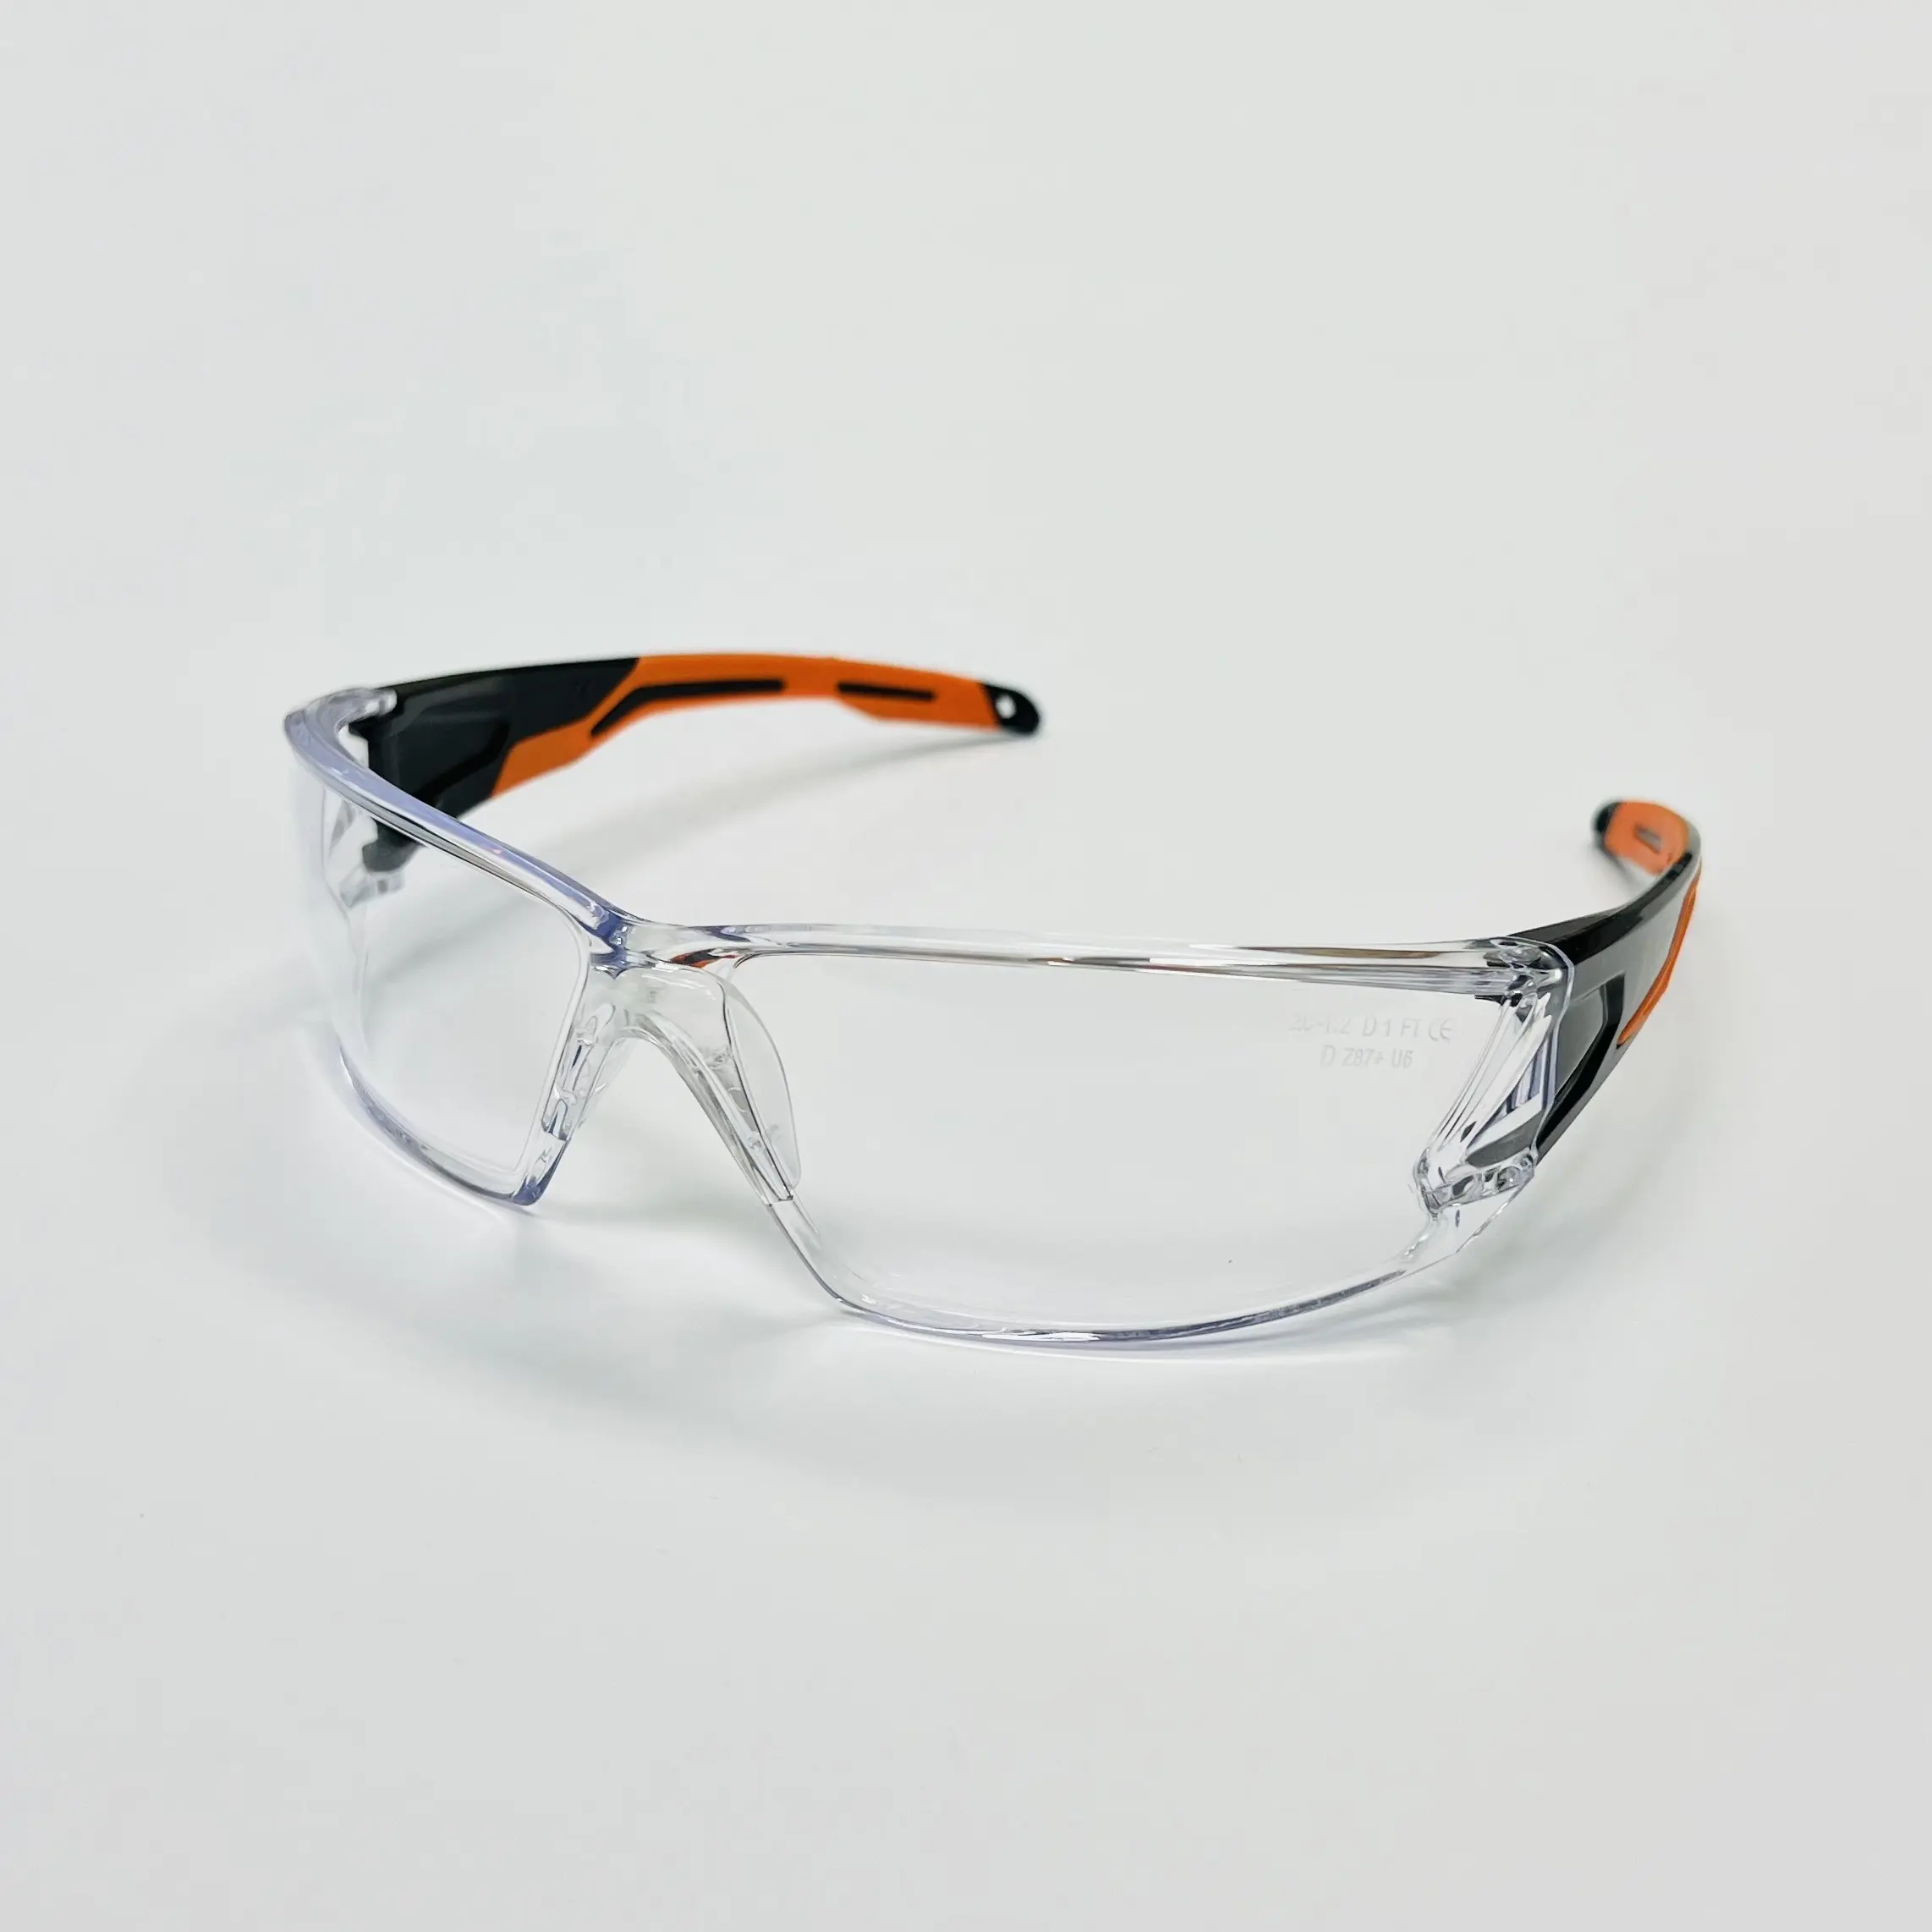 DAIYO 8517 Impact Resistance Safety Glasses Protective Spectacle Clear Anti Fog CE KN Lens